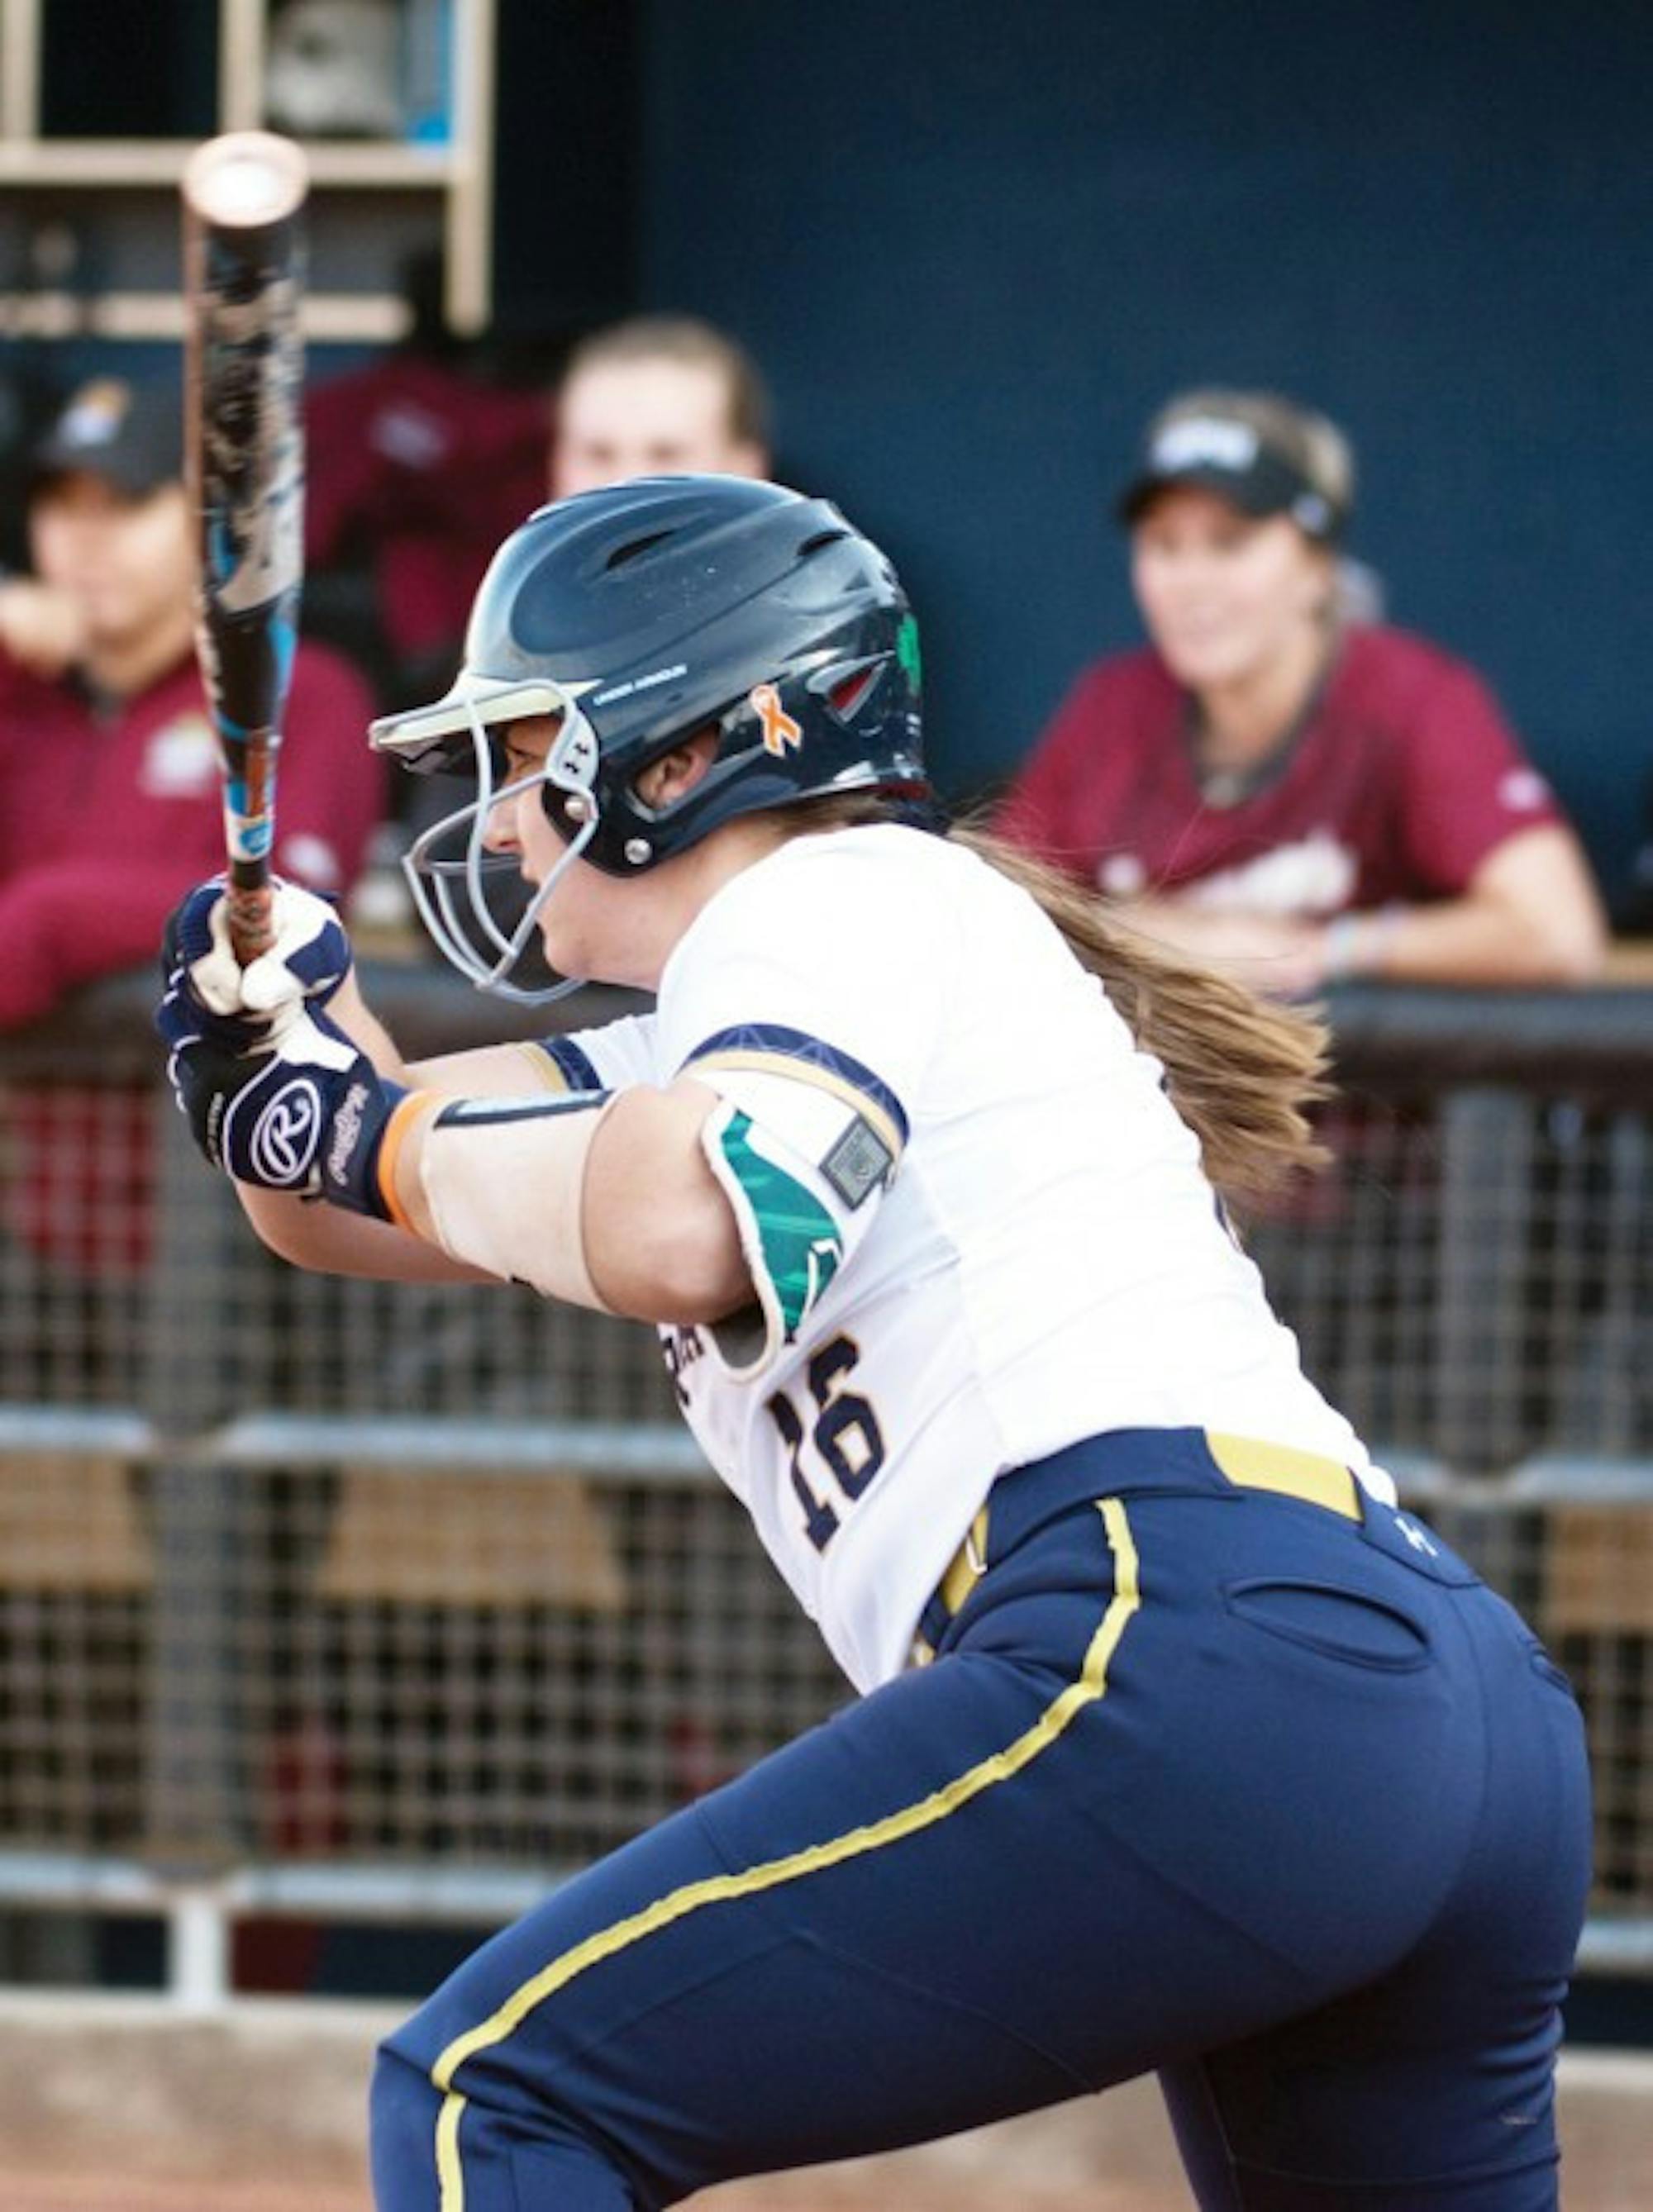 Irish sophomore infielder Caitlyn Brooks knocks a base hit during Notre Dame’s 13-4 win over IUPI on April 12.